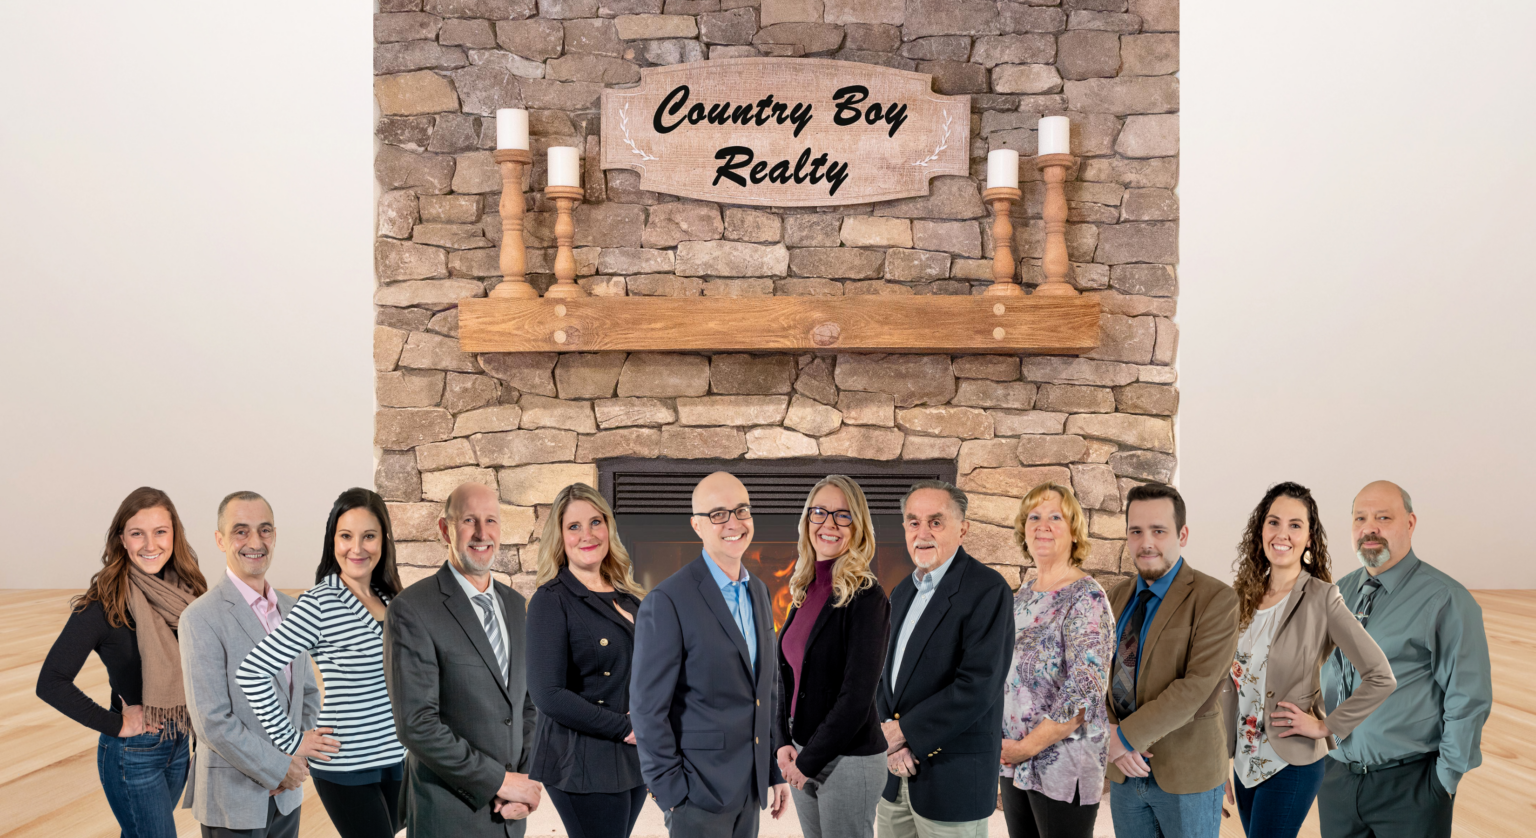 Country Boy Realty Real Estate Brokerage in Upstate NY Specializing in Country Properties, including Homes, Farms, Land & Commercial Businesses!